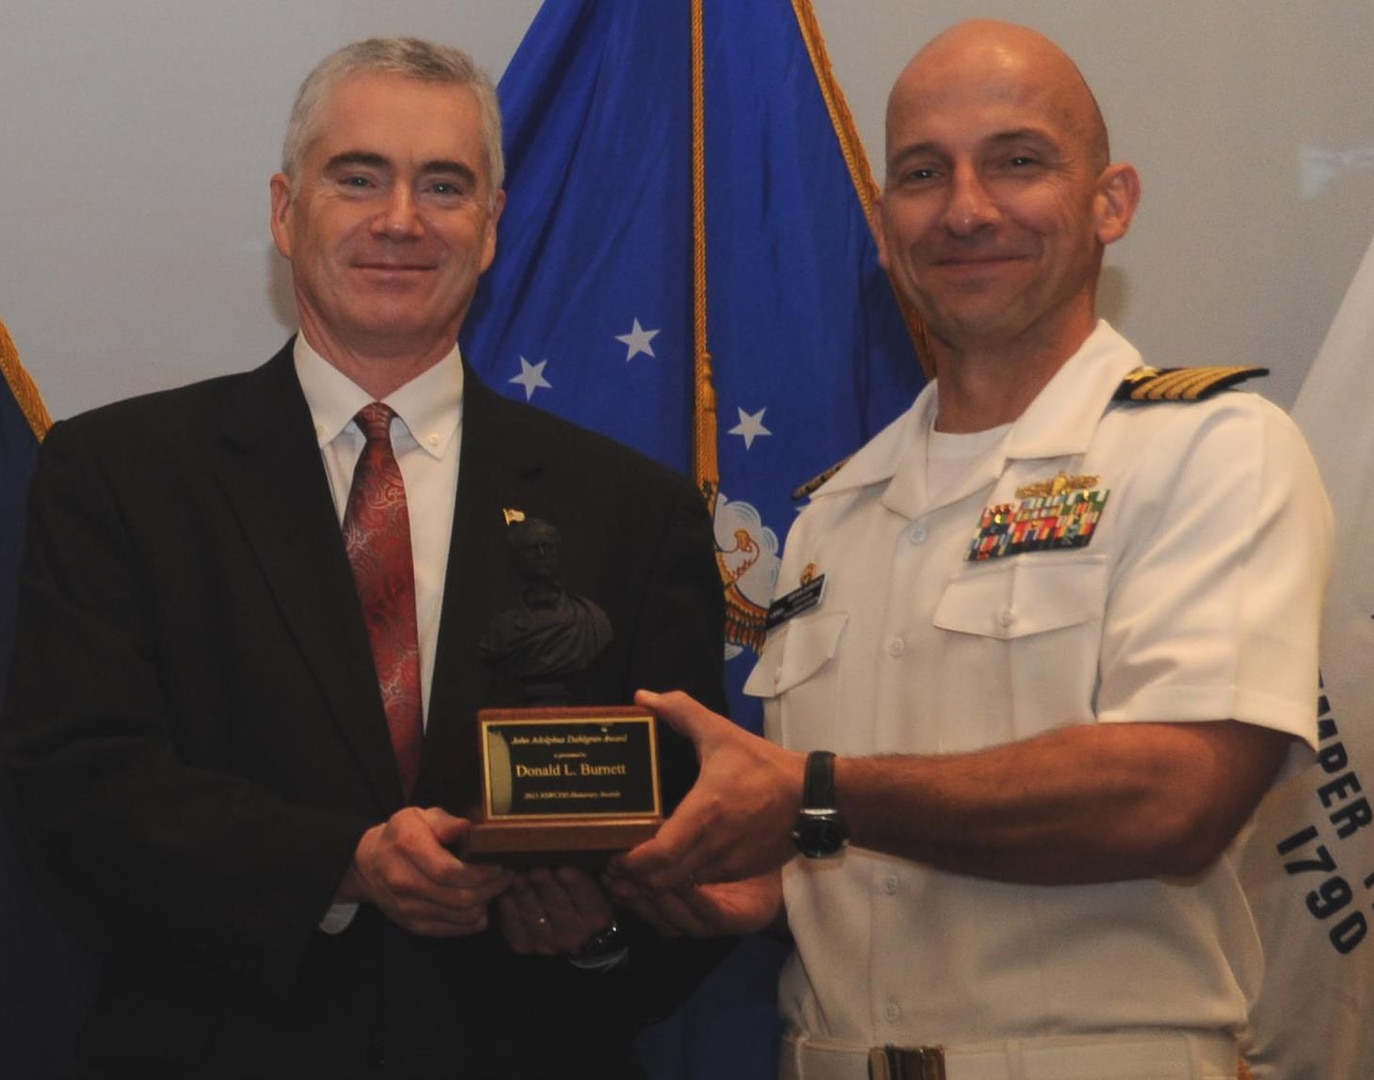 DAHLGREN, Va. - Naval Surface Warfare Center Dahlgren Division (NSWCDD) Commanding Officer Capt. Brian Durant presents Dohn Burnett with the John Adolphus Dahlgren Award for his years of exceptional technical and organizational leadership of NSWCDD at the command's Annual Honor Awards ceremony on May 18, 2016. "Mr. Burnett achieved numerous technical milestones throughout his exemplary career, including the integration and installation of the Aegis Baseline 9 combat system, basis cyber capability integration, establishment of the Fast Frigate Program, and the foundation for integration of railgun and laser systems into surface combatants," according to the  citation.